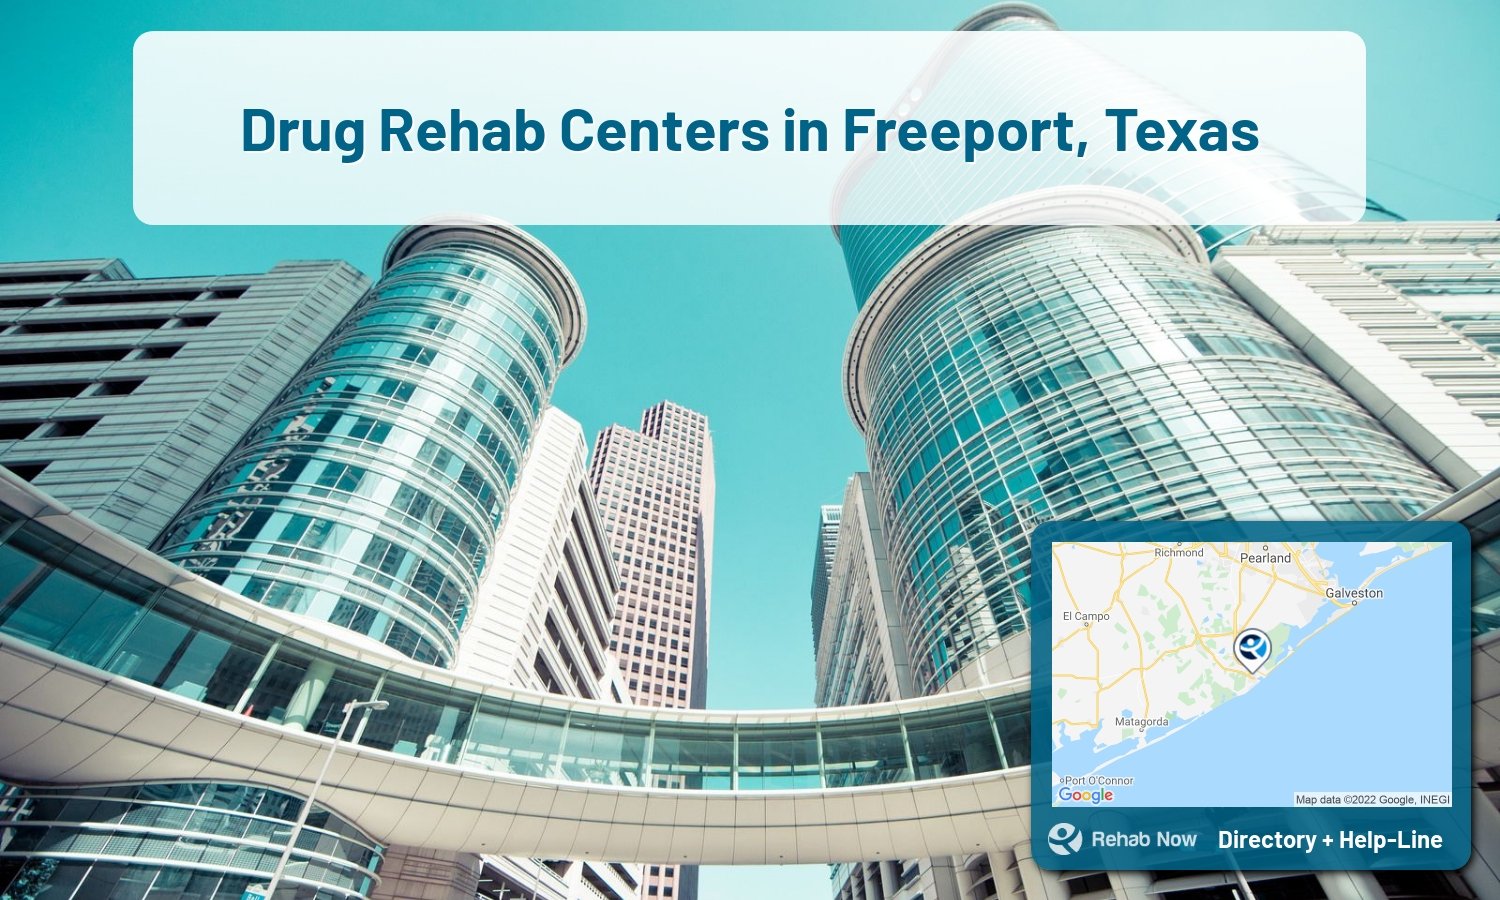 Our experts can help you find treatment now in Freeport, Texas. We list drug rehab and alcohol centers in Texas.